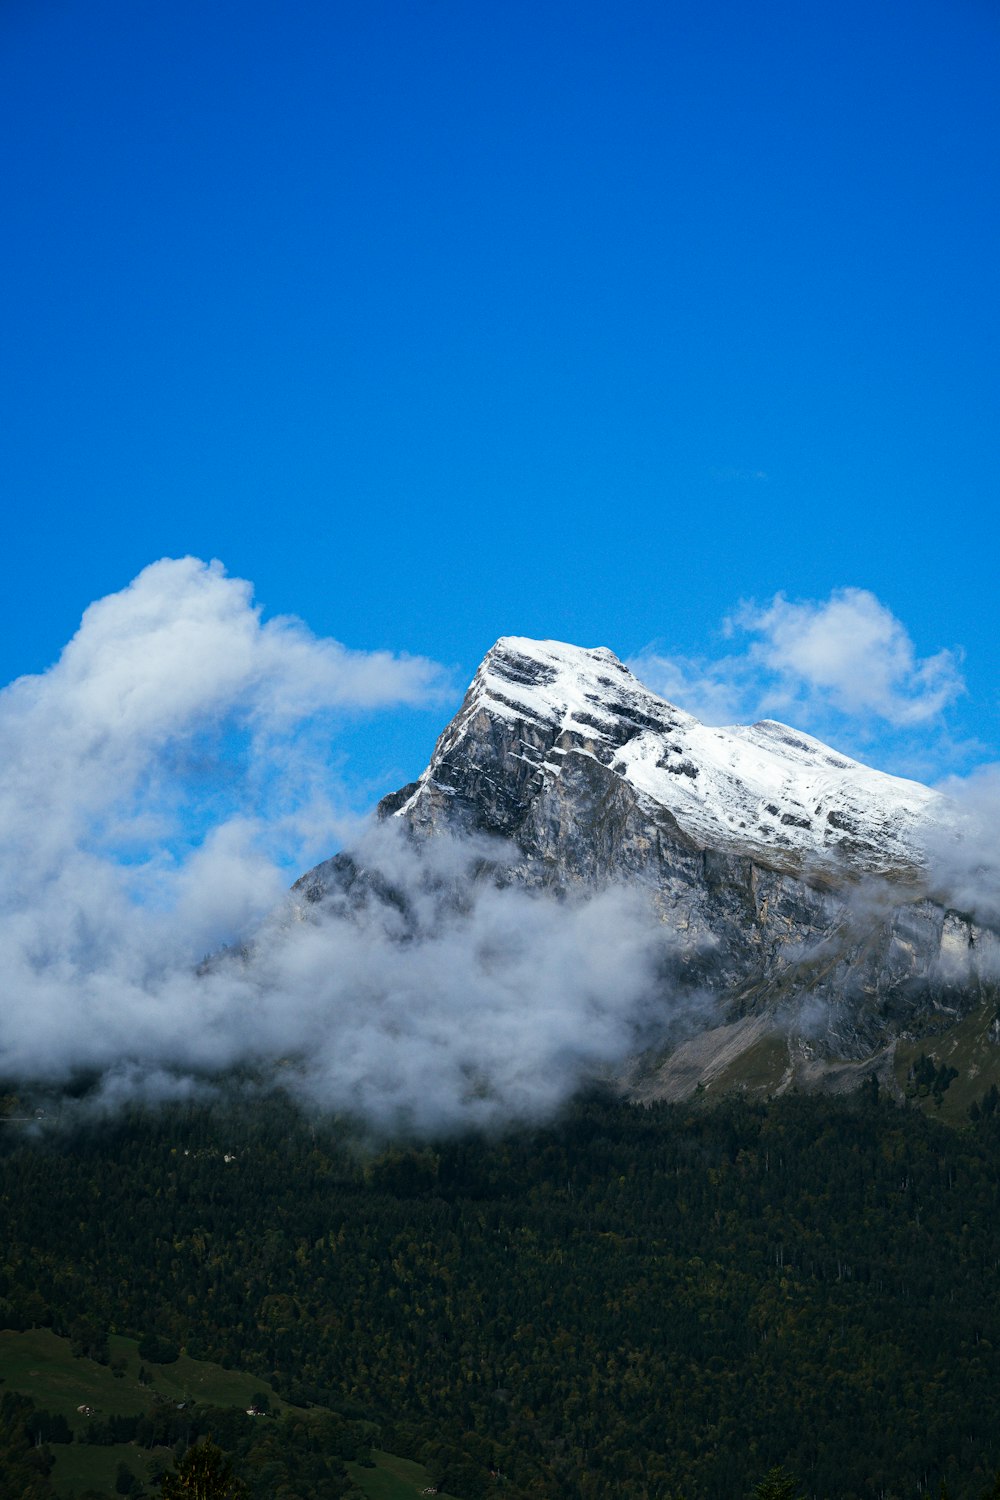 a mountain covered in snow and clouds under a blue sky